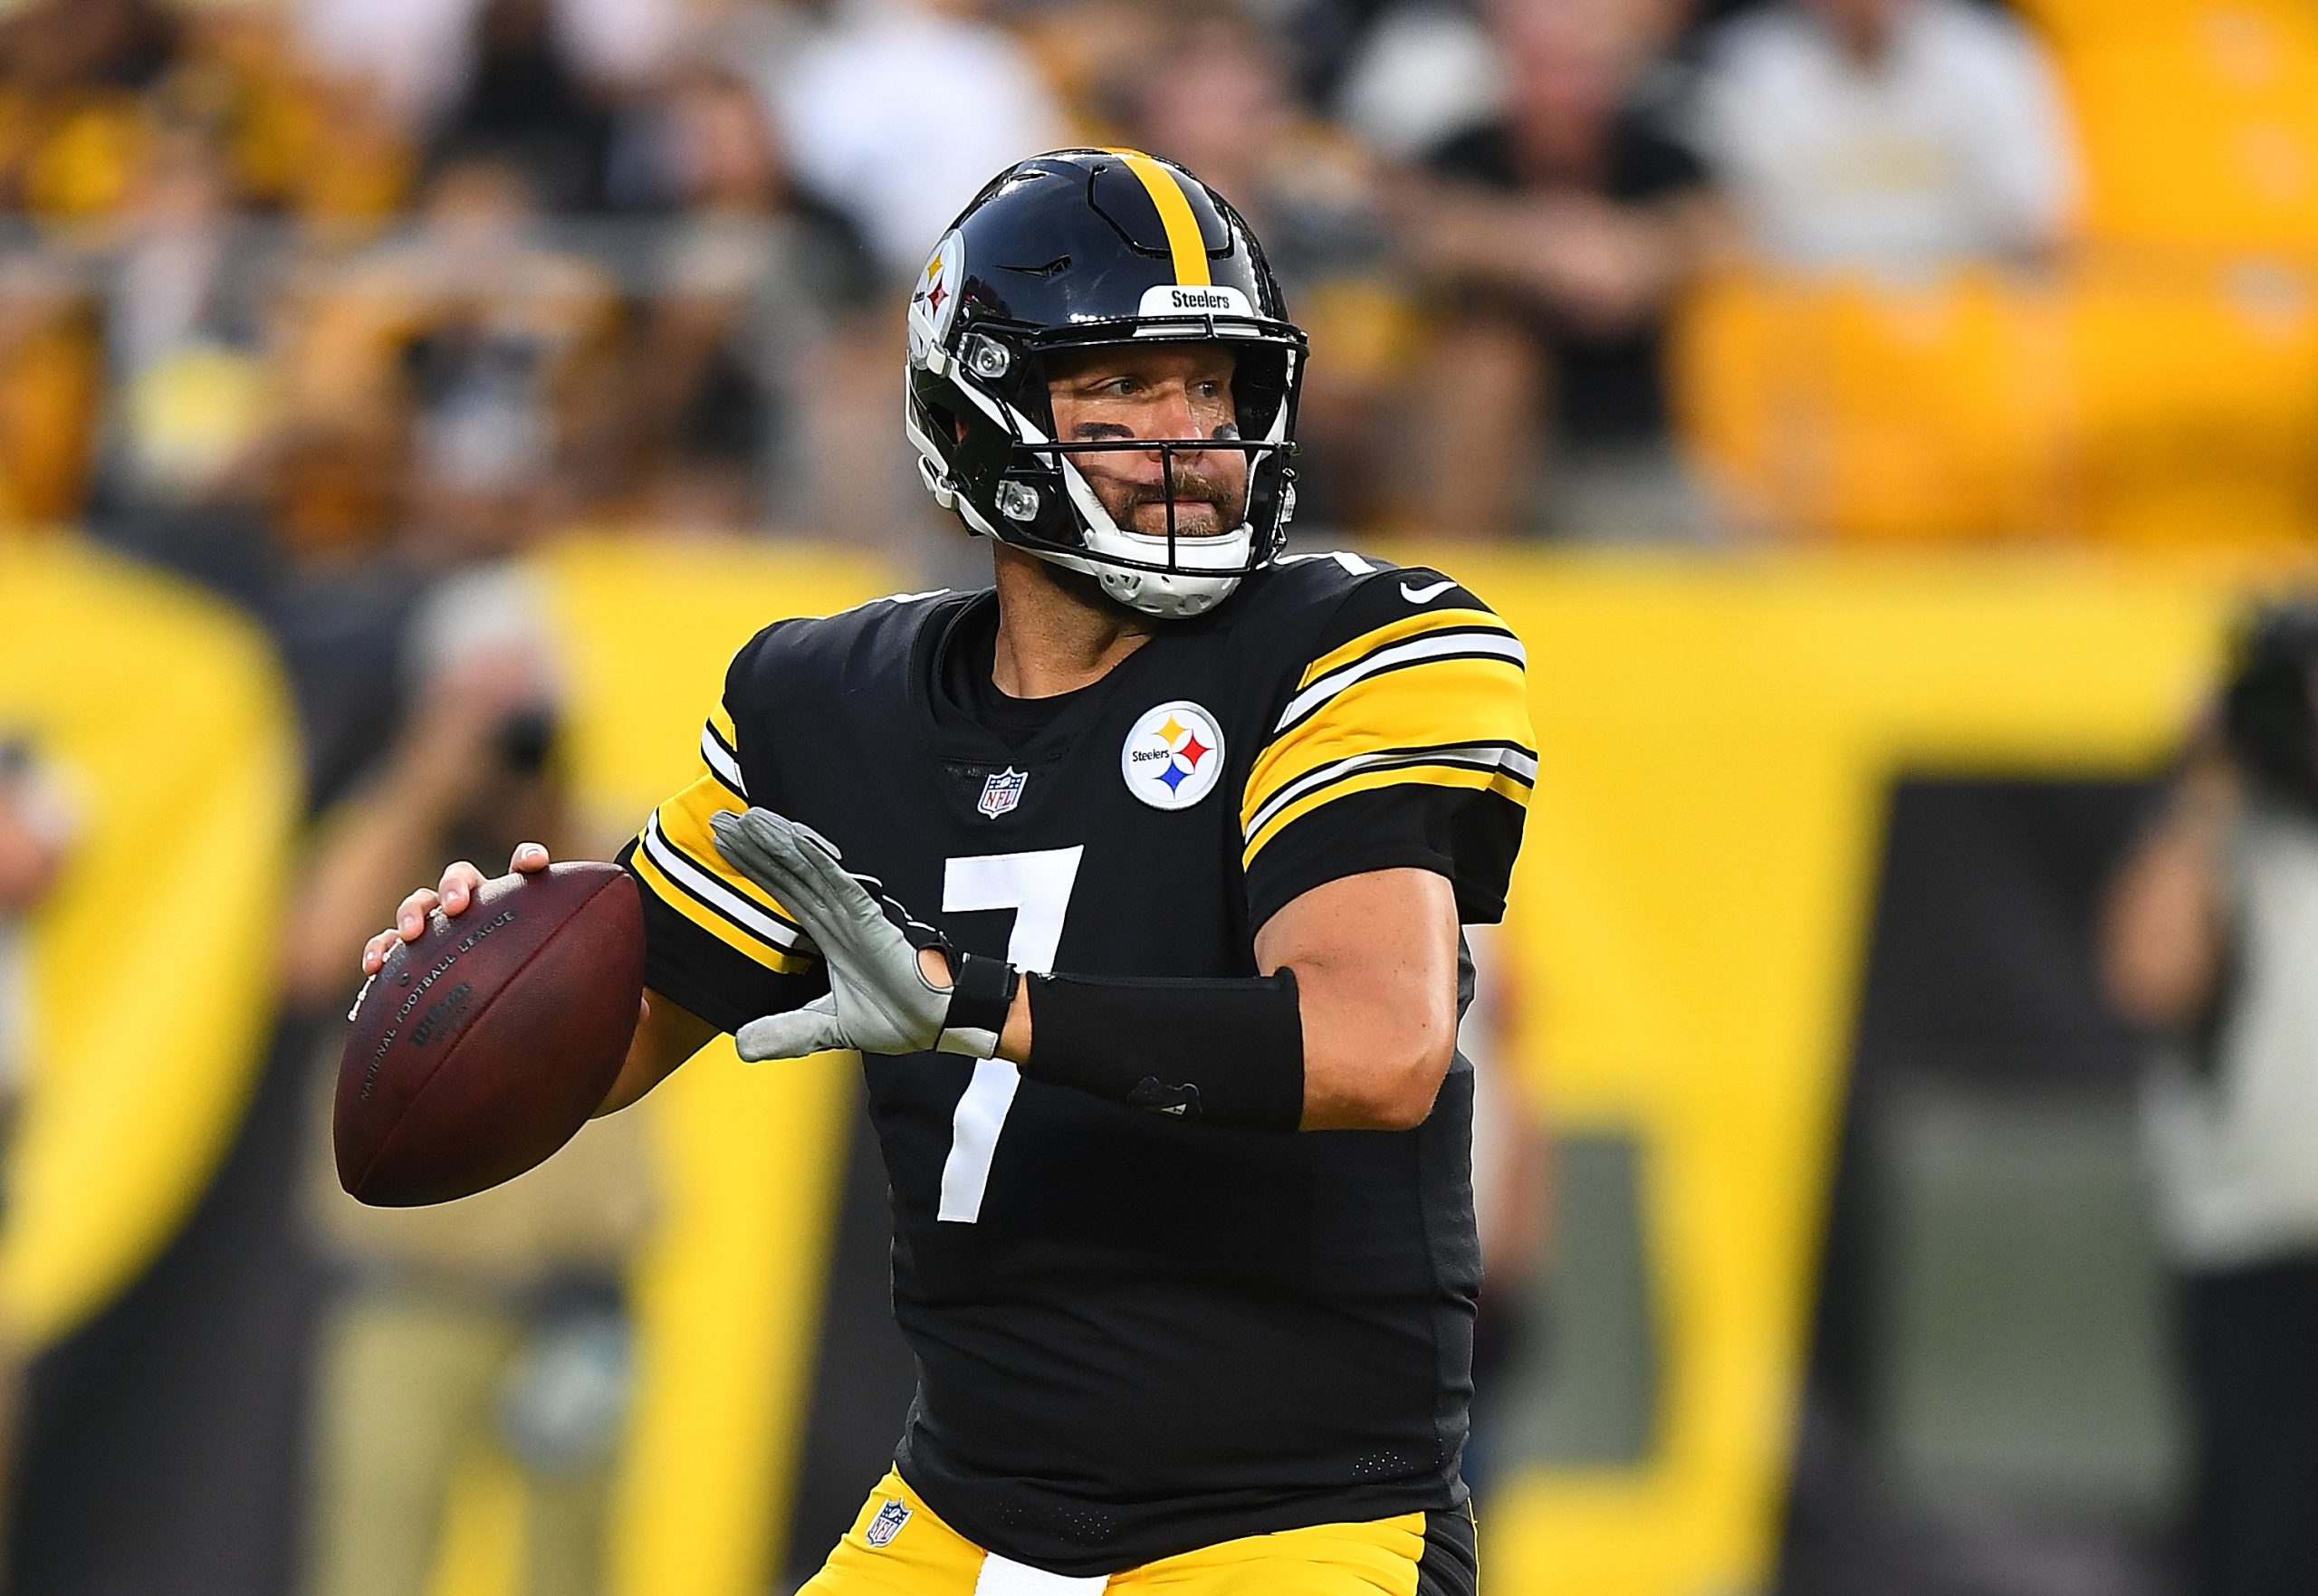 Ben Roethlisberger Looks to Prove He’s Not Done Yet, and his Preseason Performance is Helping His Case